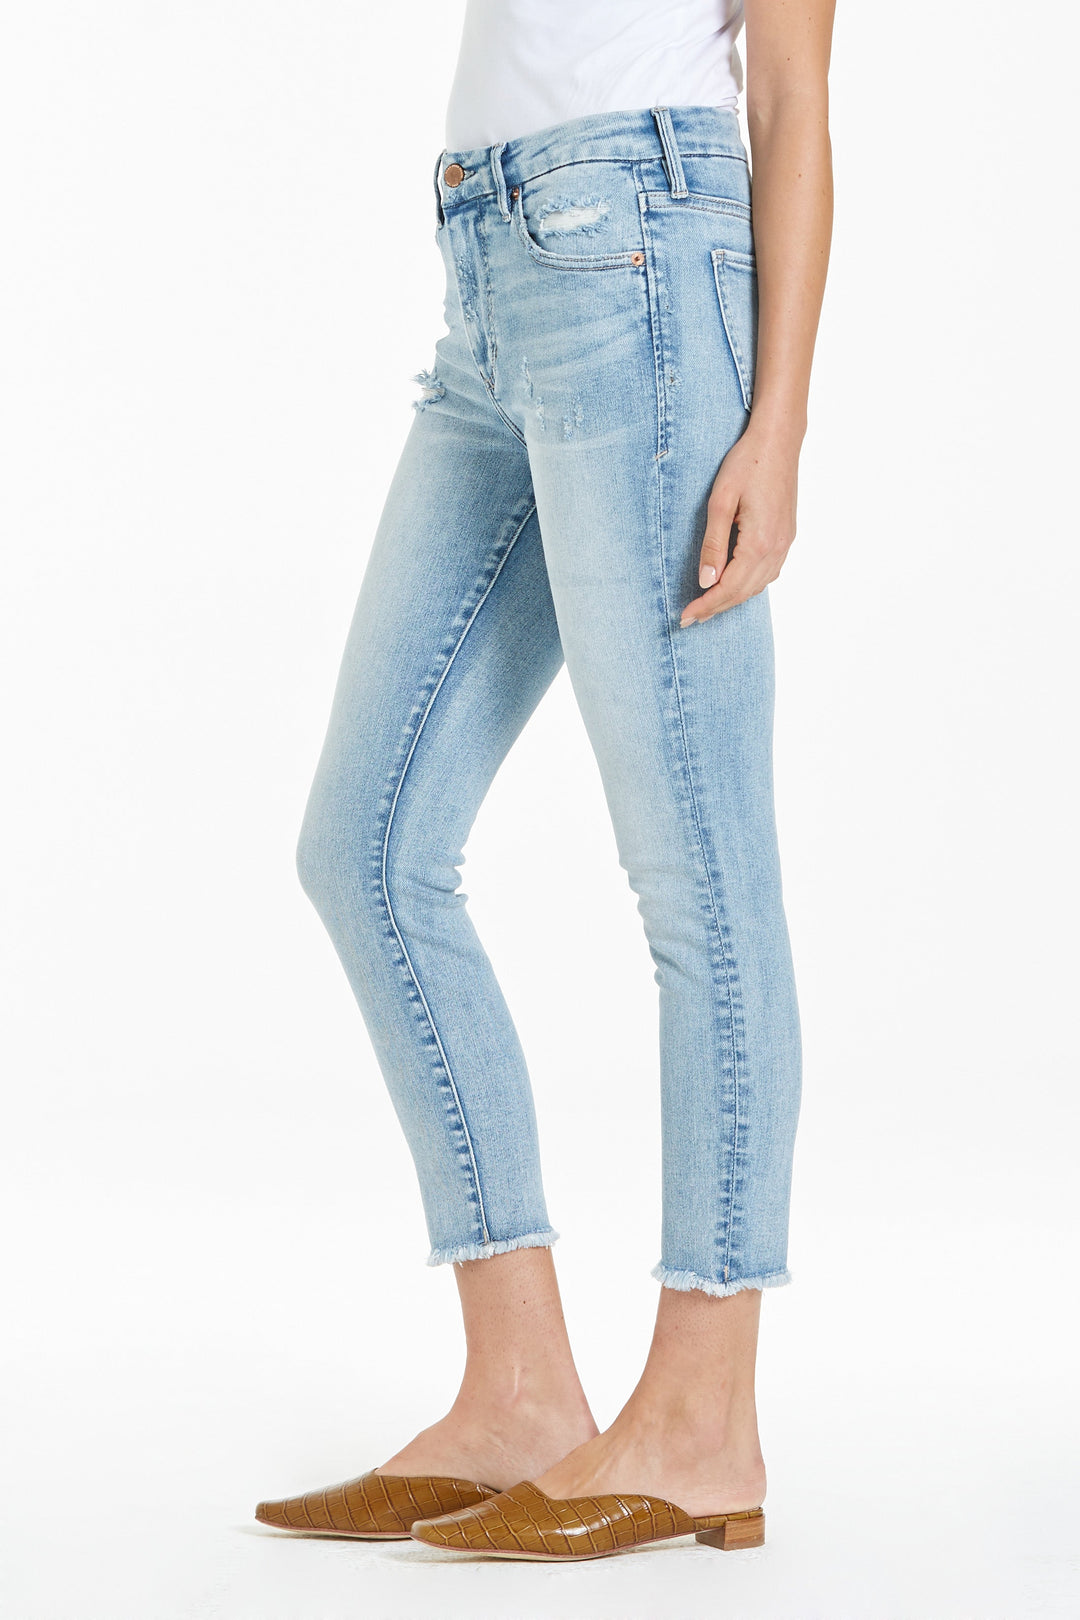 image of a female model wearing a PIXIE HIGH RISE ANKLE CROPPED SKINNY JEANS SANTA CLARA JEANS